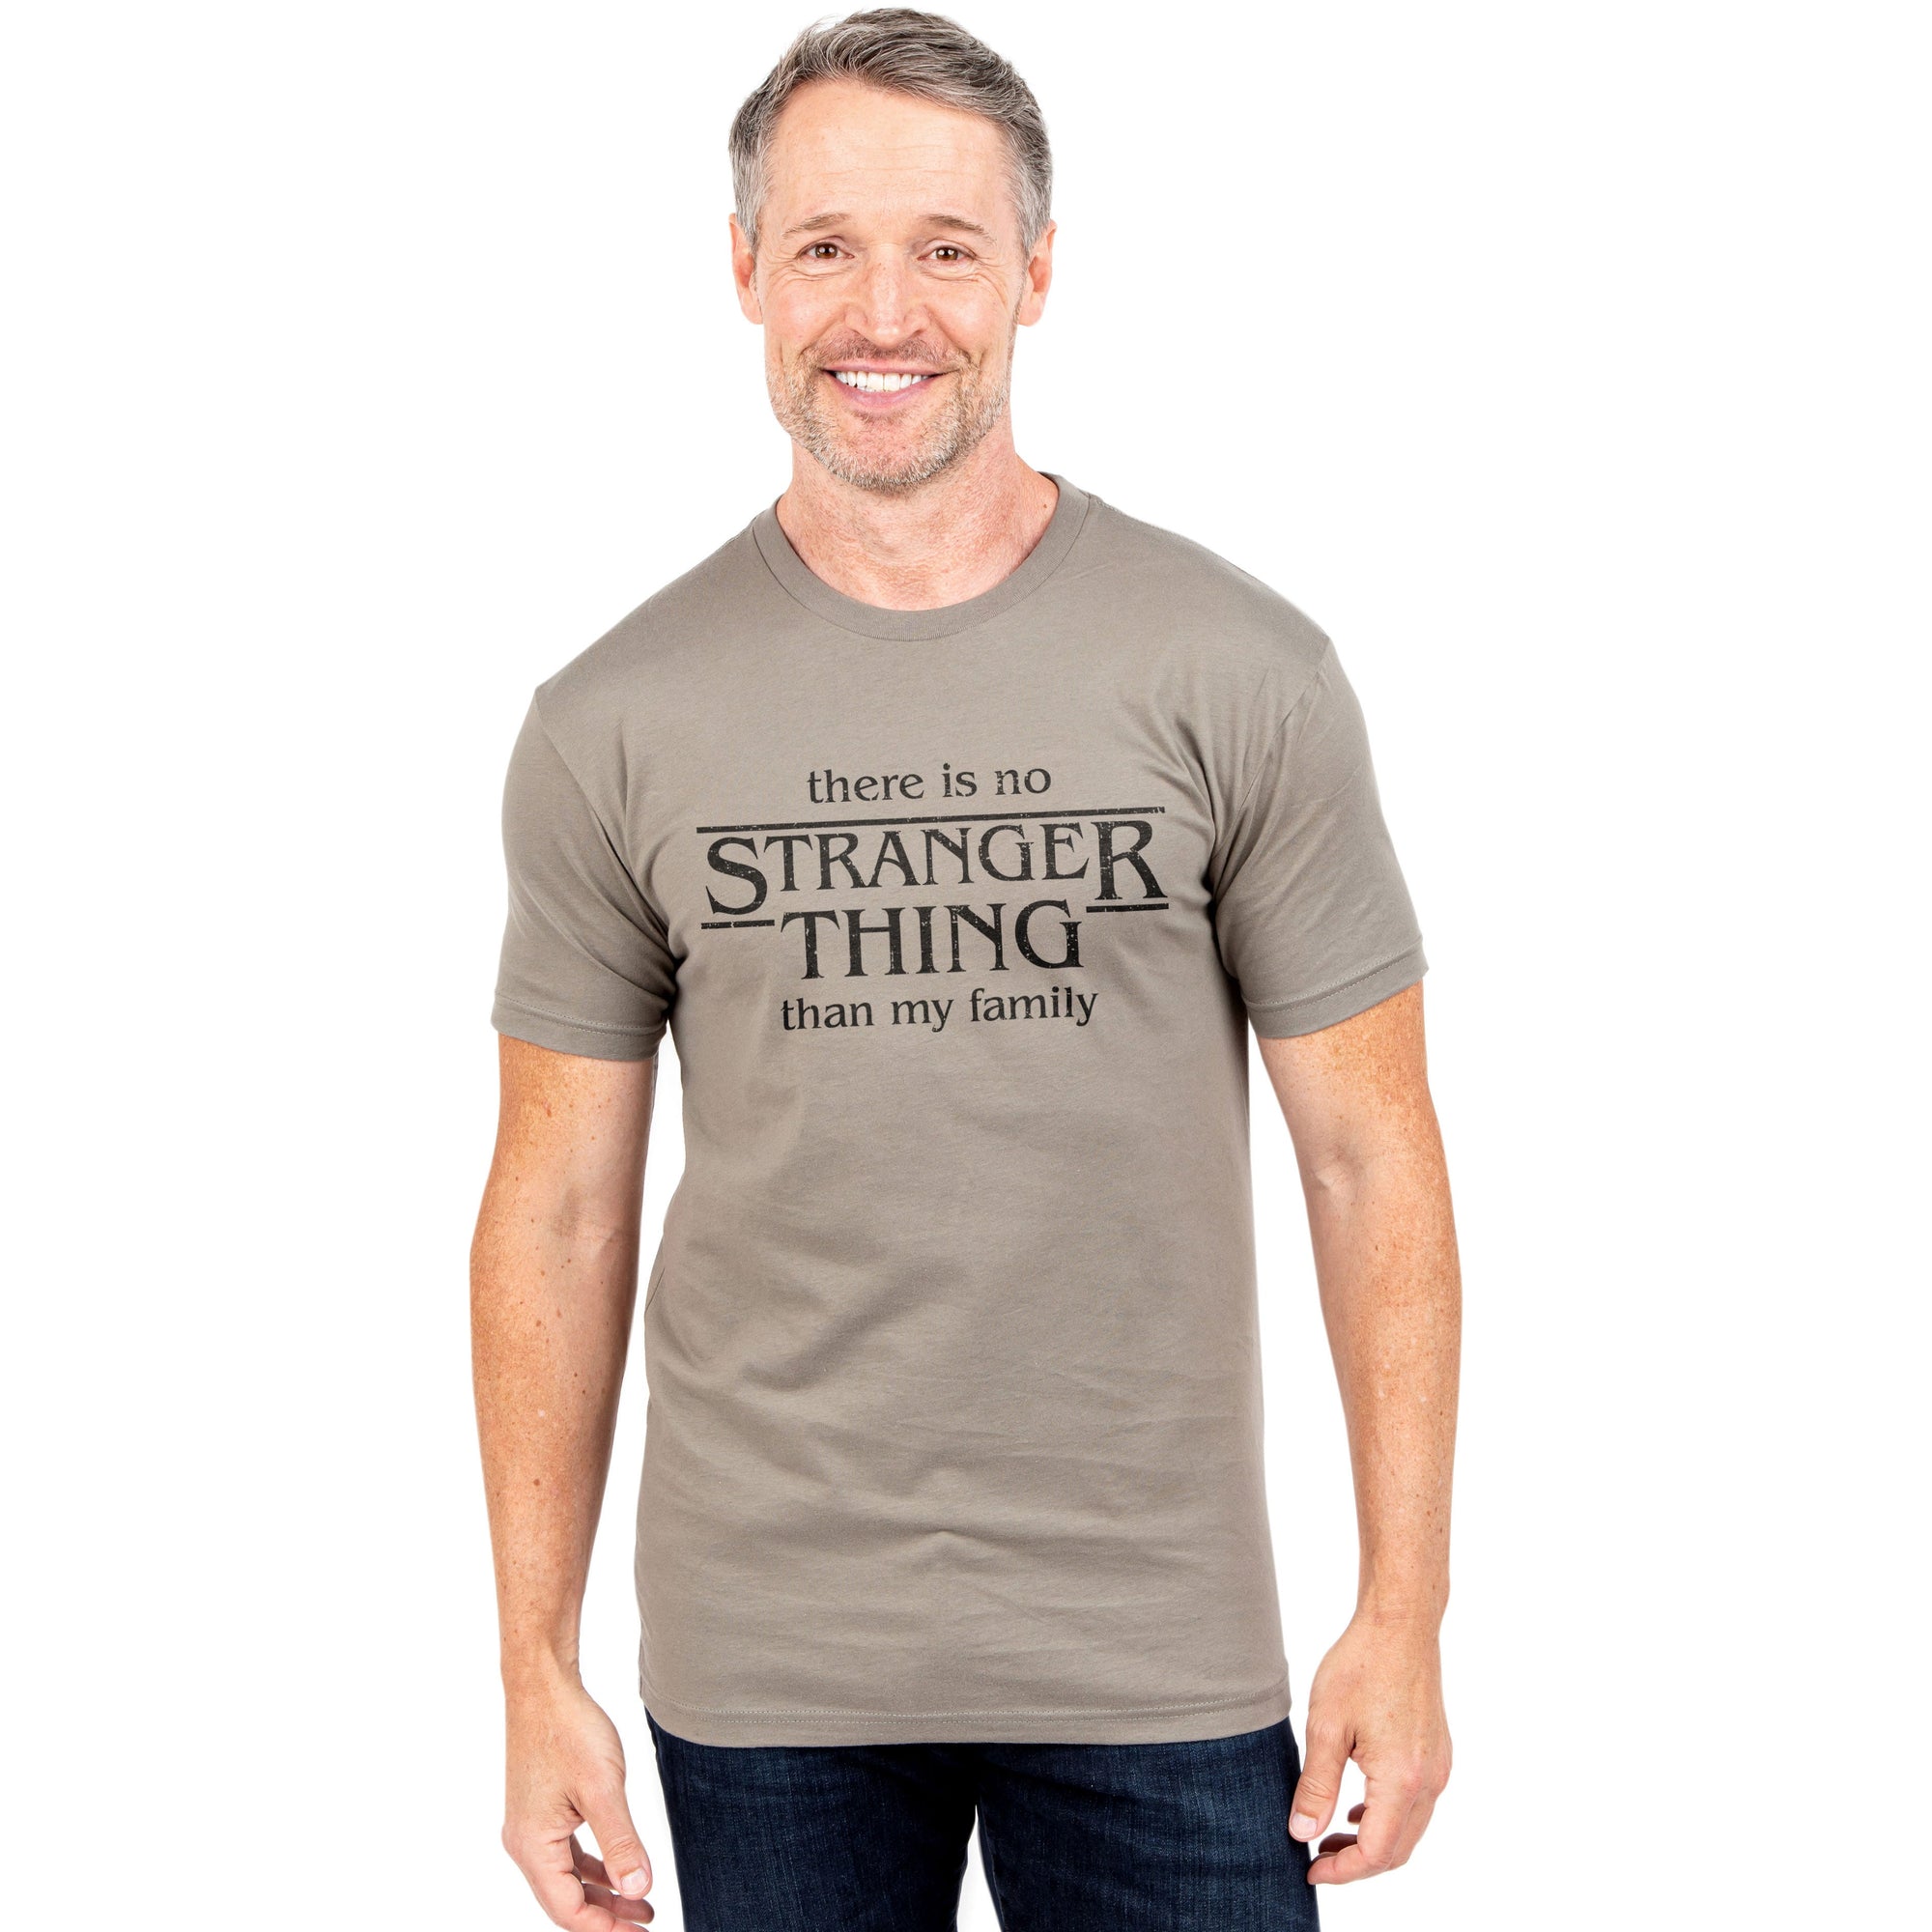 There Is No Stranger Thing Than My Family Printed Graphic Men's Crew T-Shirt Heather Tan Model Image